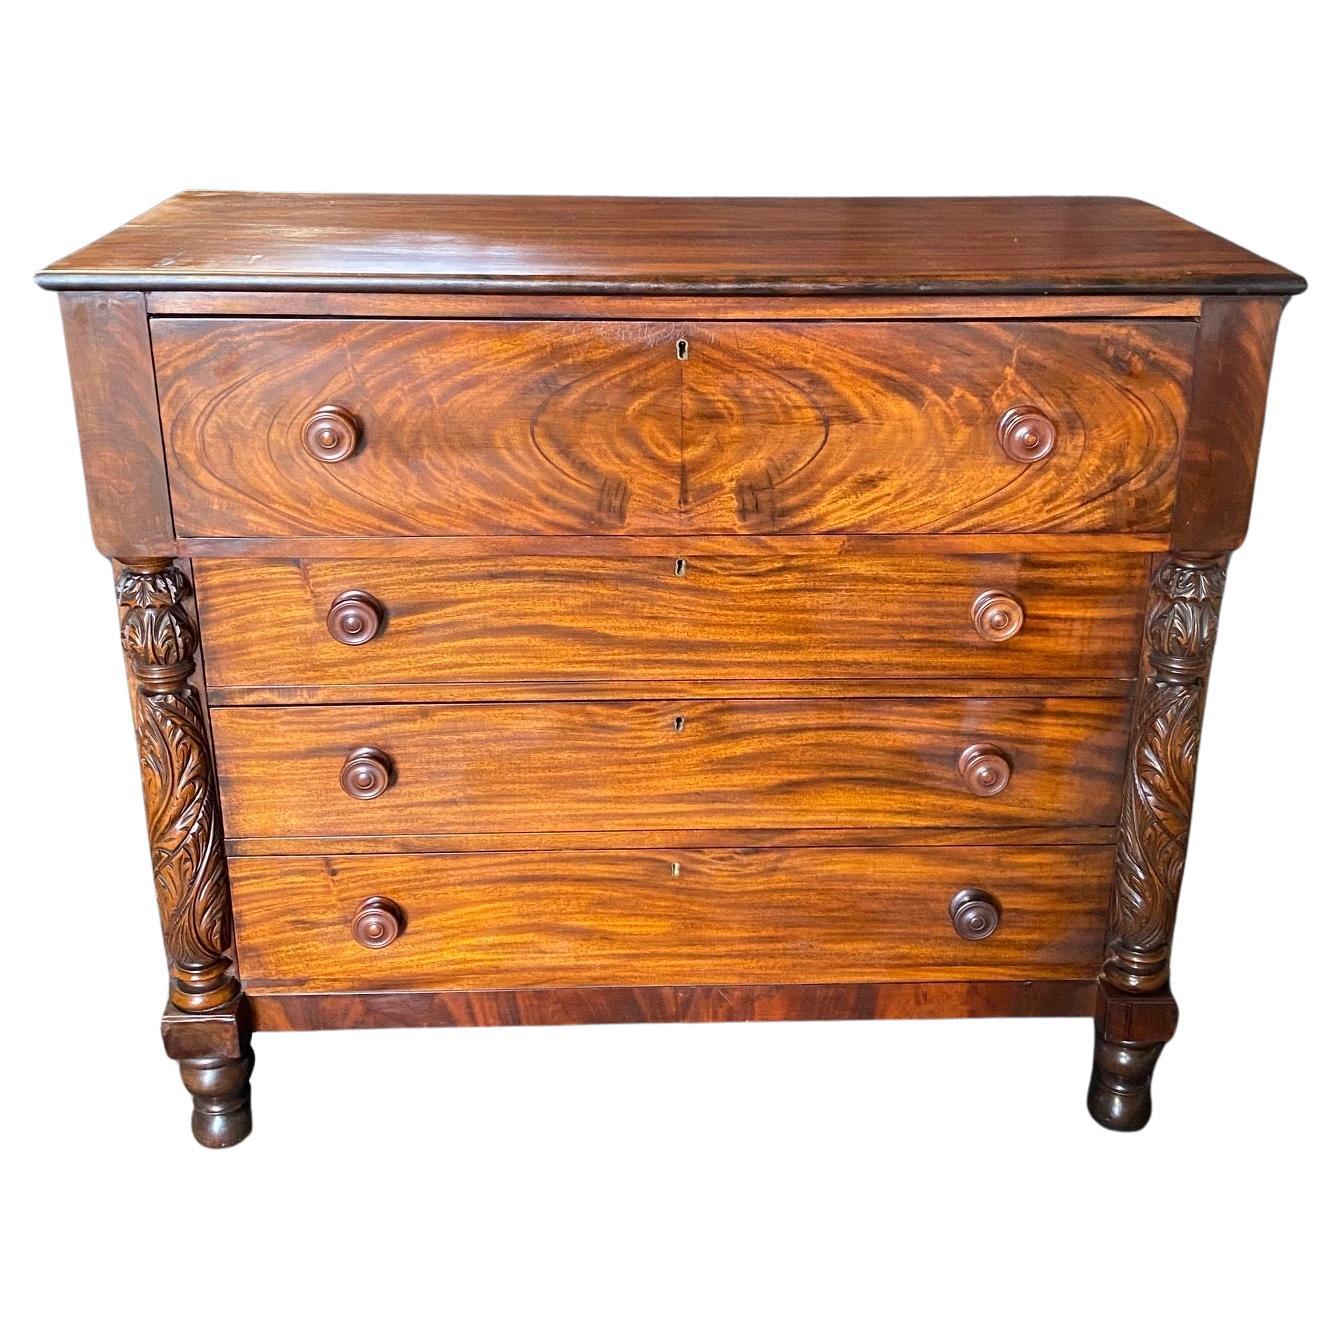 When was the first chest of drawers made?